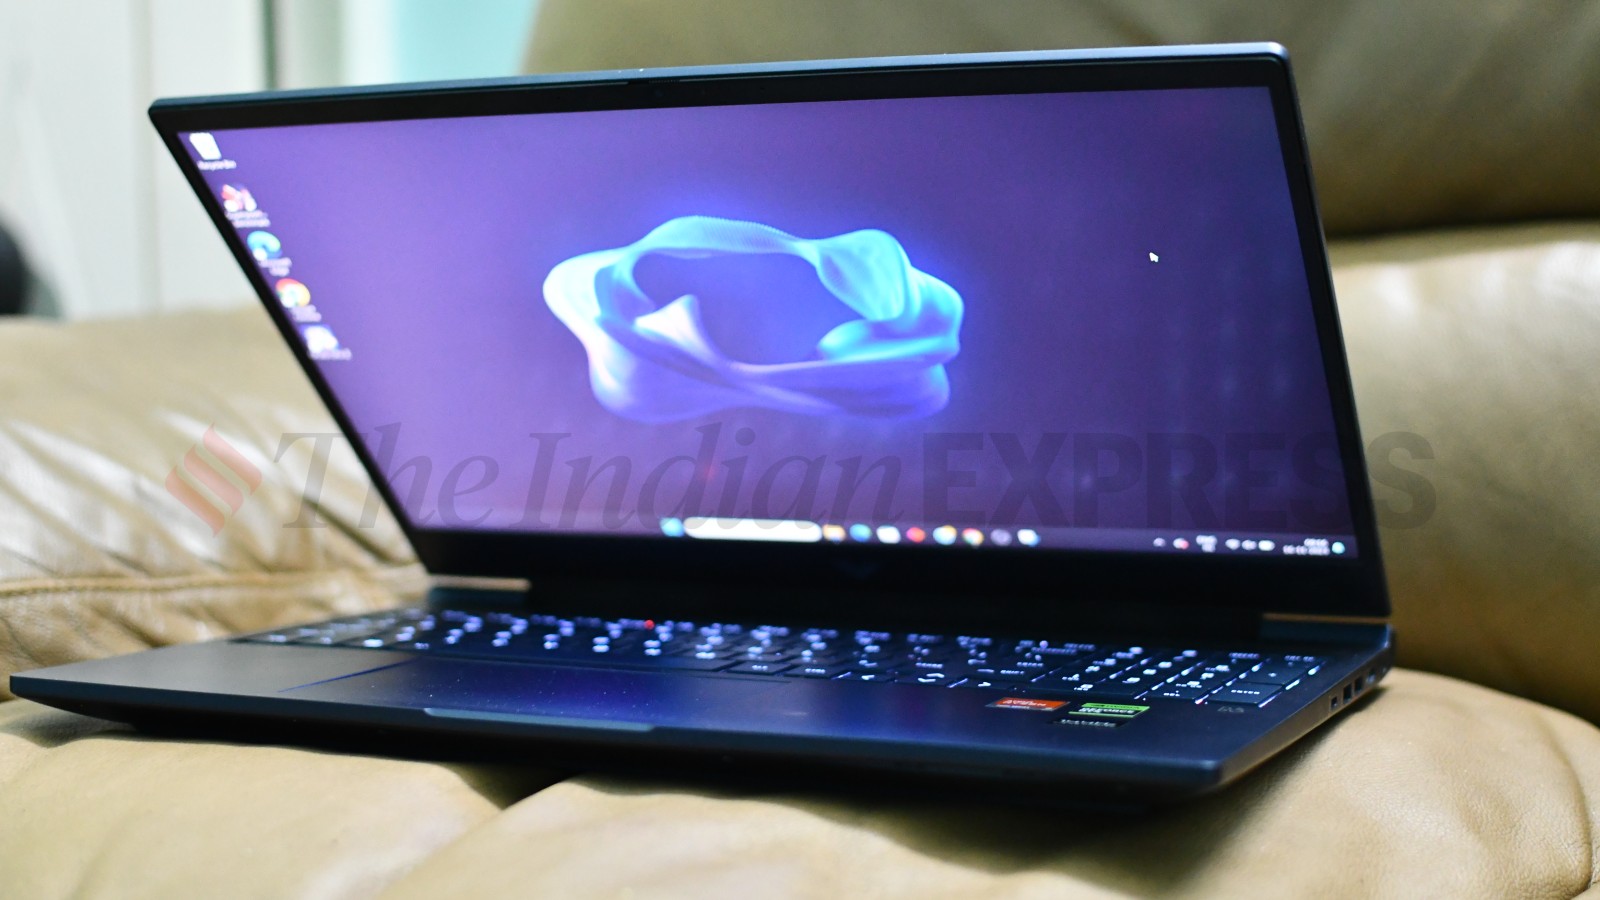 HP Victus 15 review: A mediocre gaming laptop at a great price